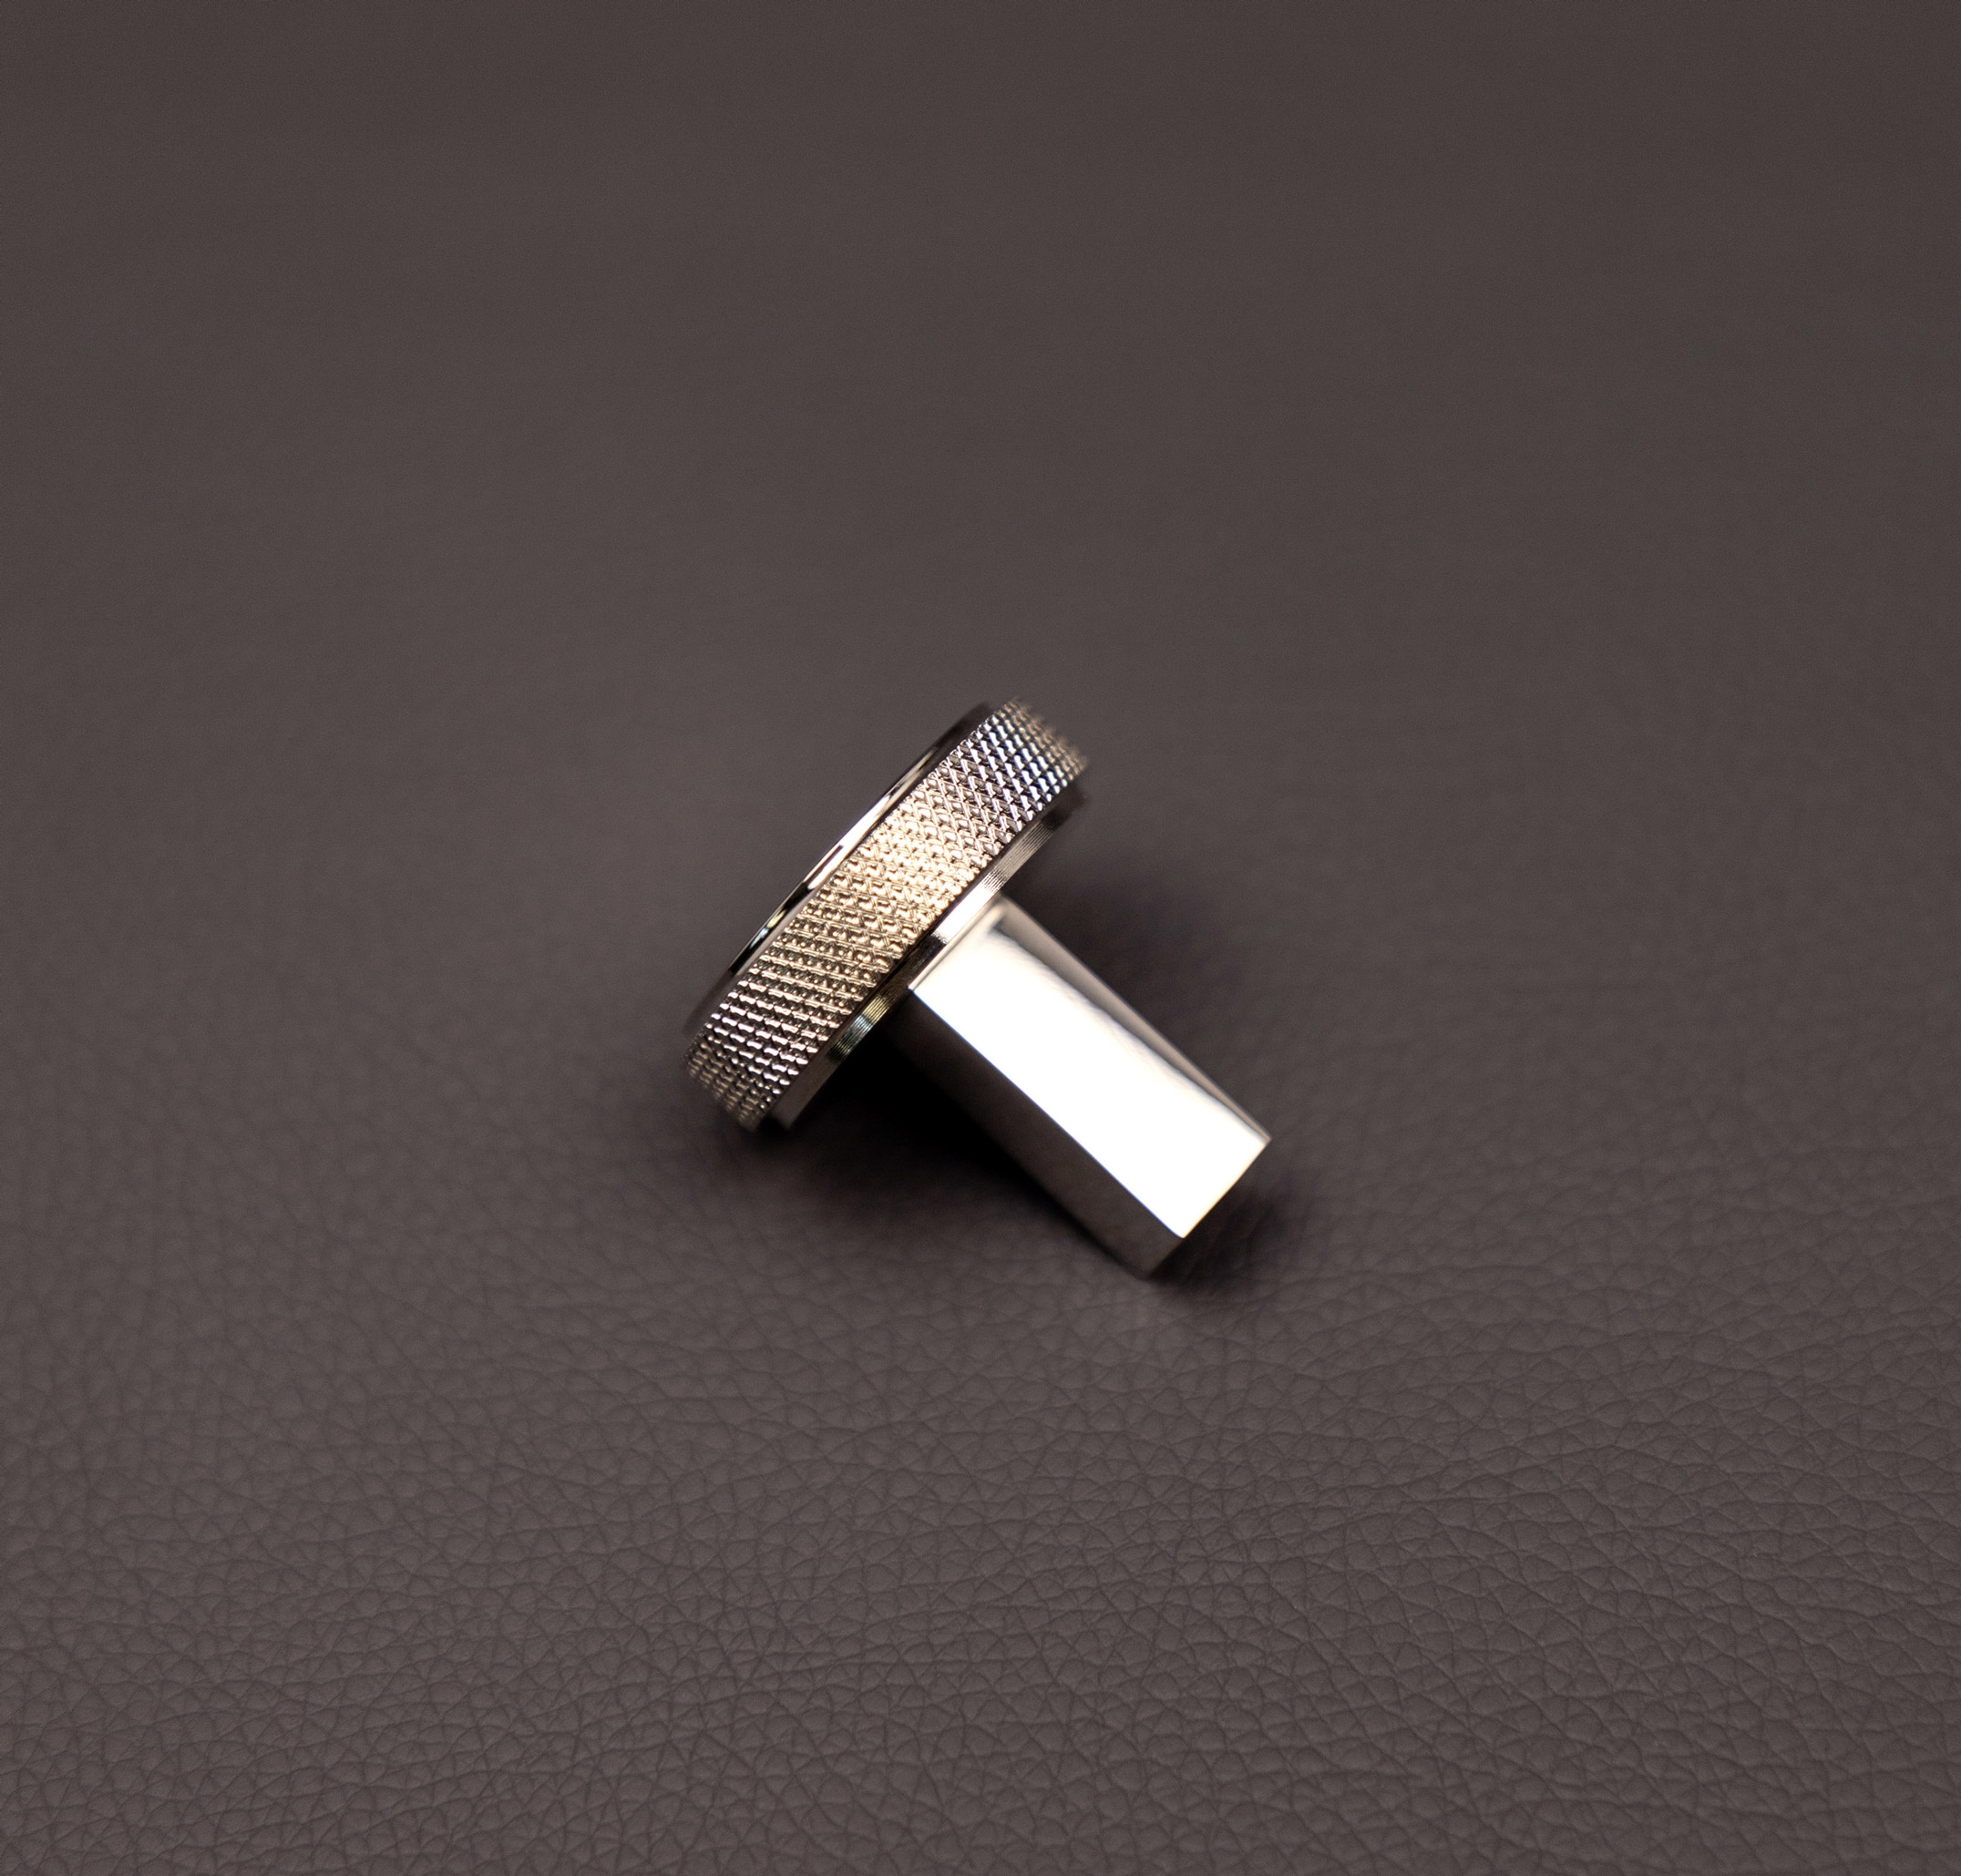 Knurled Knob Top with a Square Knob Post in Polished Nickel